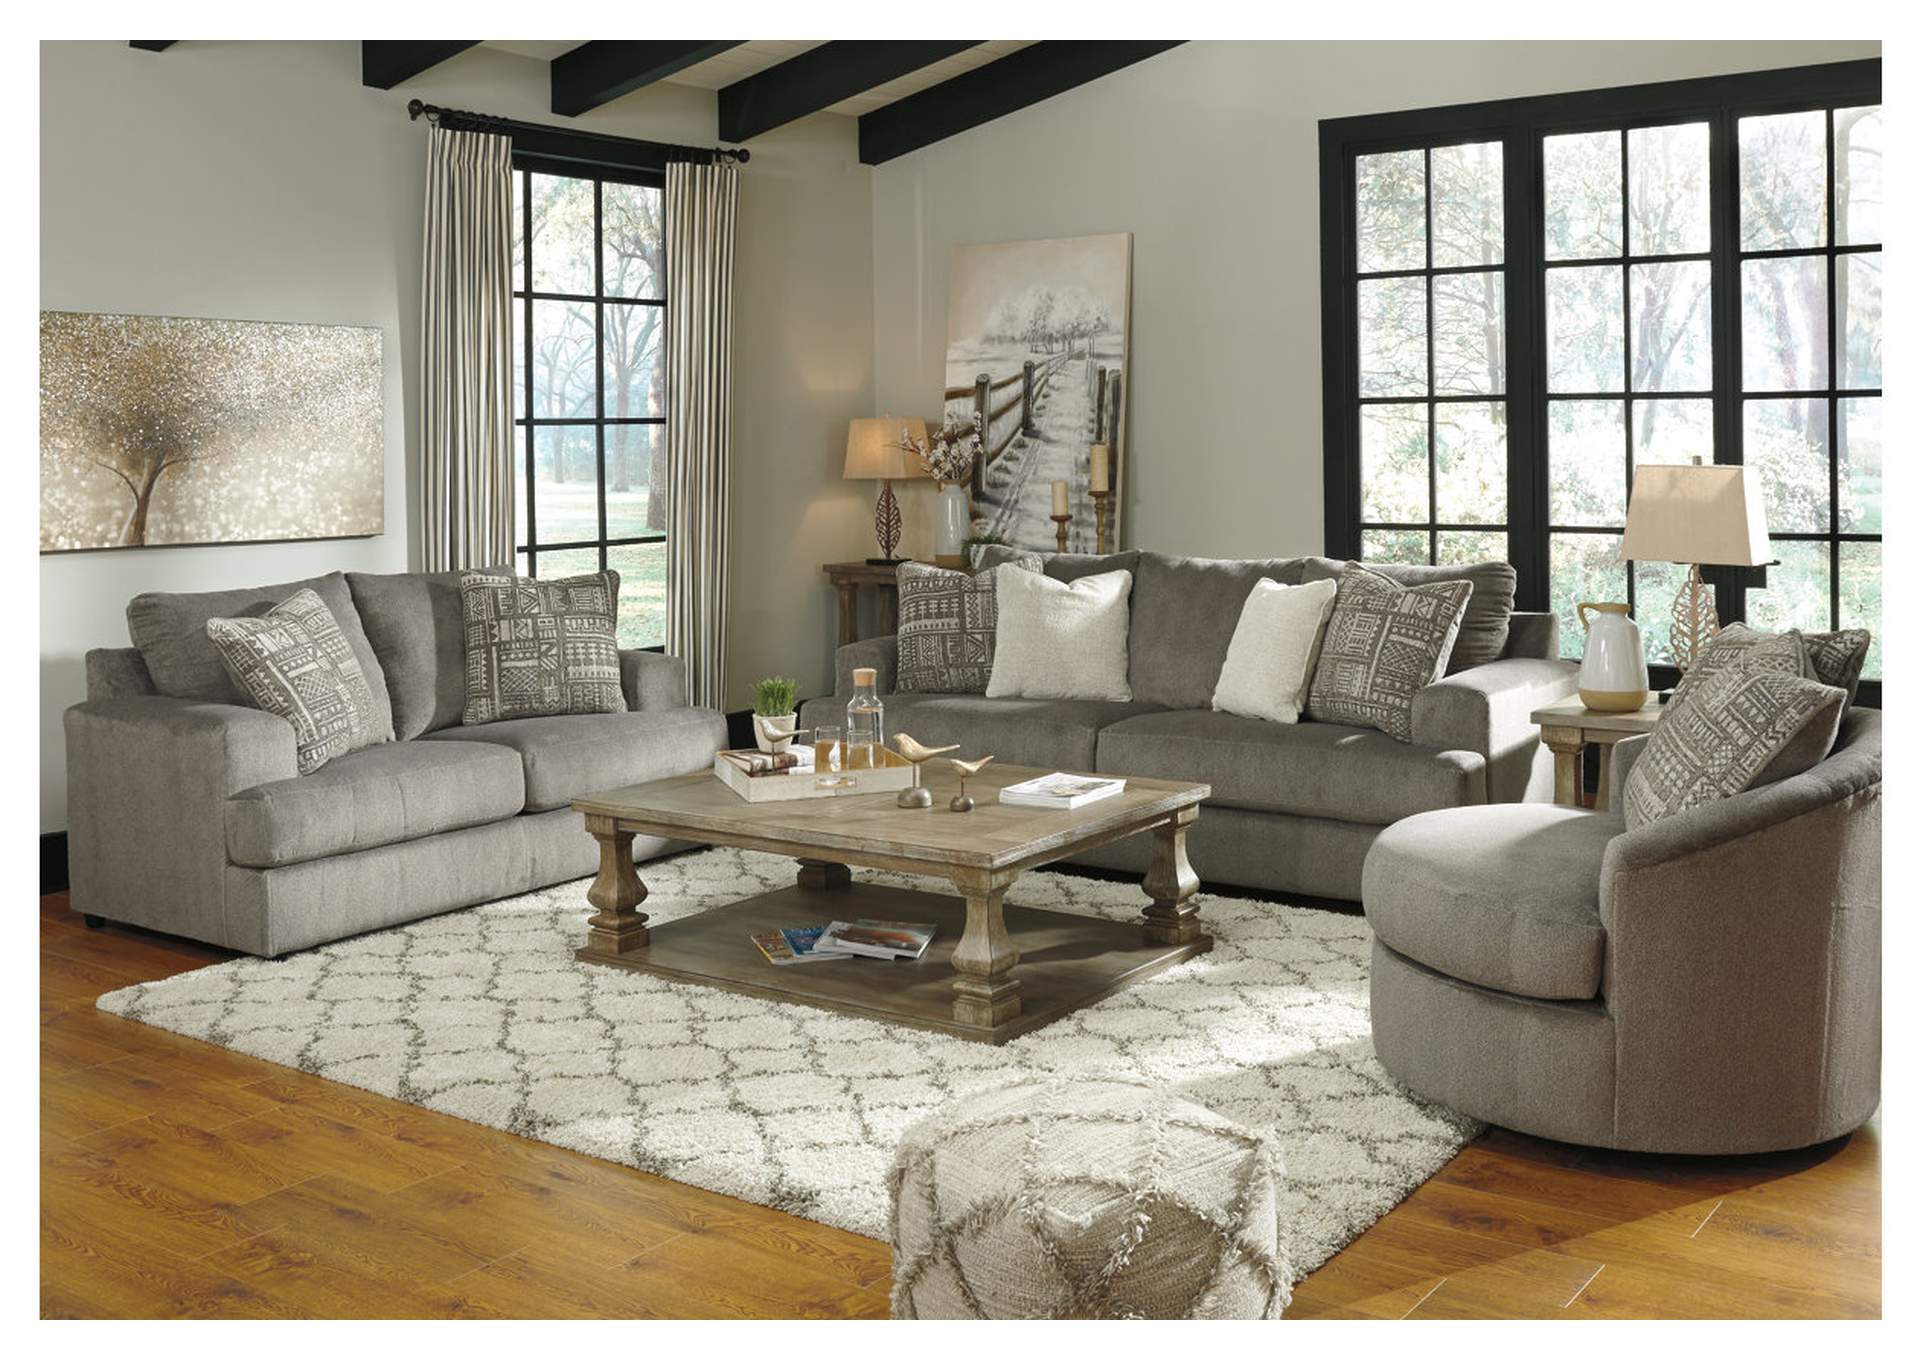 Soletren Sofa, Loveseat and Chair,Signature Design By Ashley